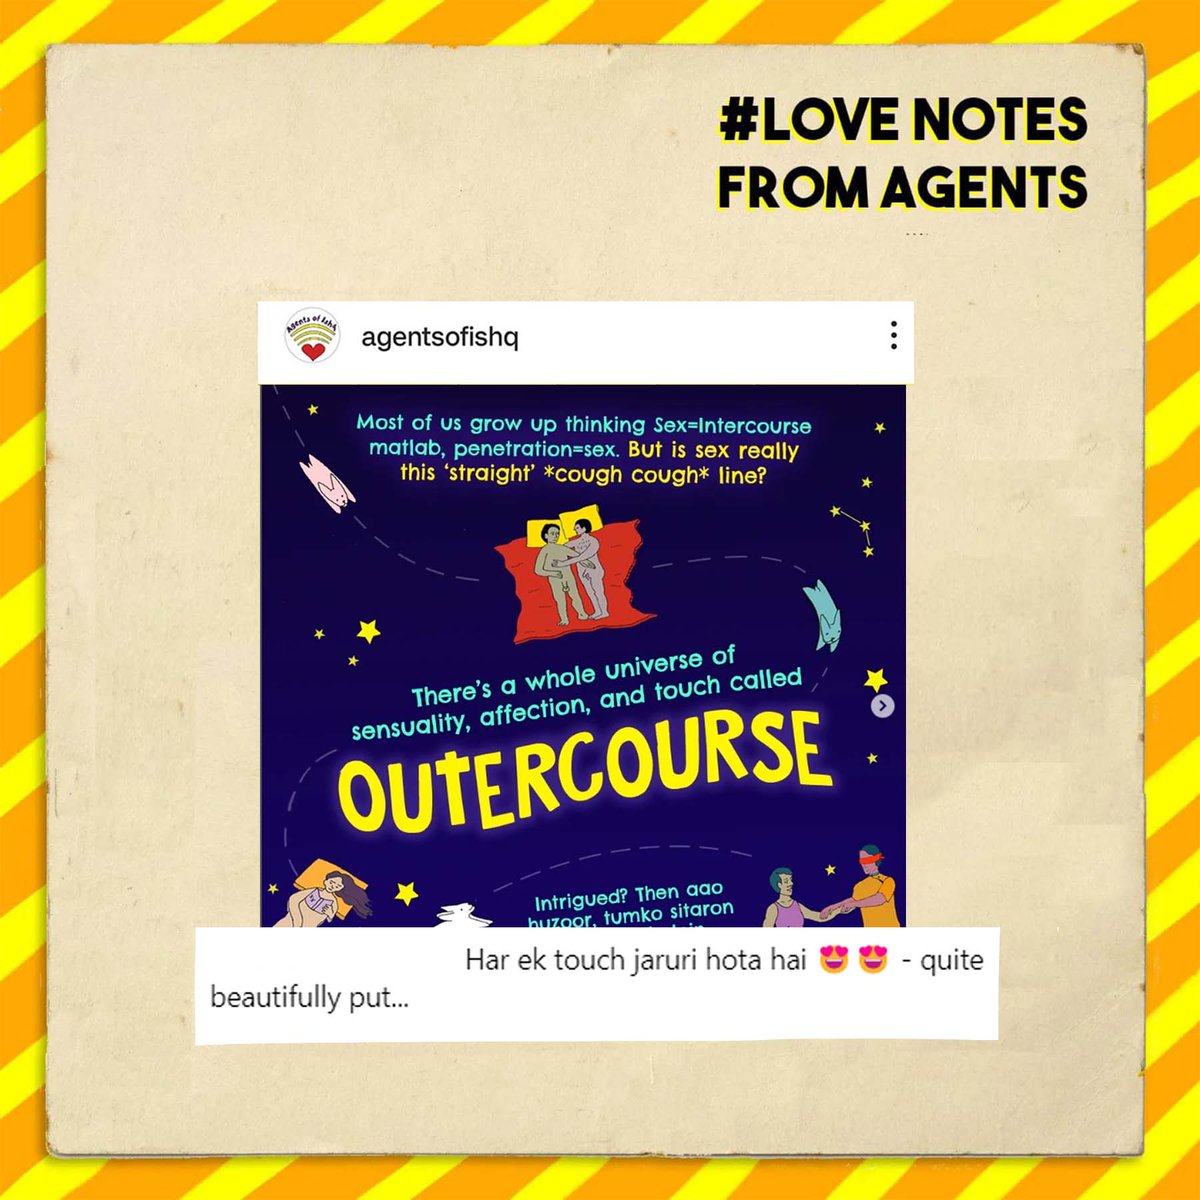 We love that you loved our post on outercourse! Here's to expanding our understanding on all things sex and desire, together. Thanks, Agents! #LoveNotes #ComplimentsforAOI #AgentsKiAwaaz #Gratitude #LoveNotesFromAgents